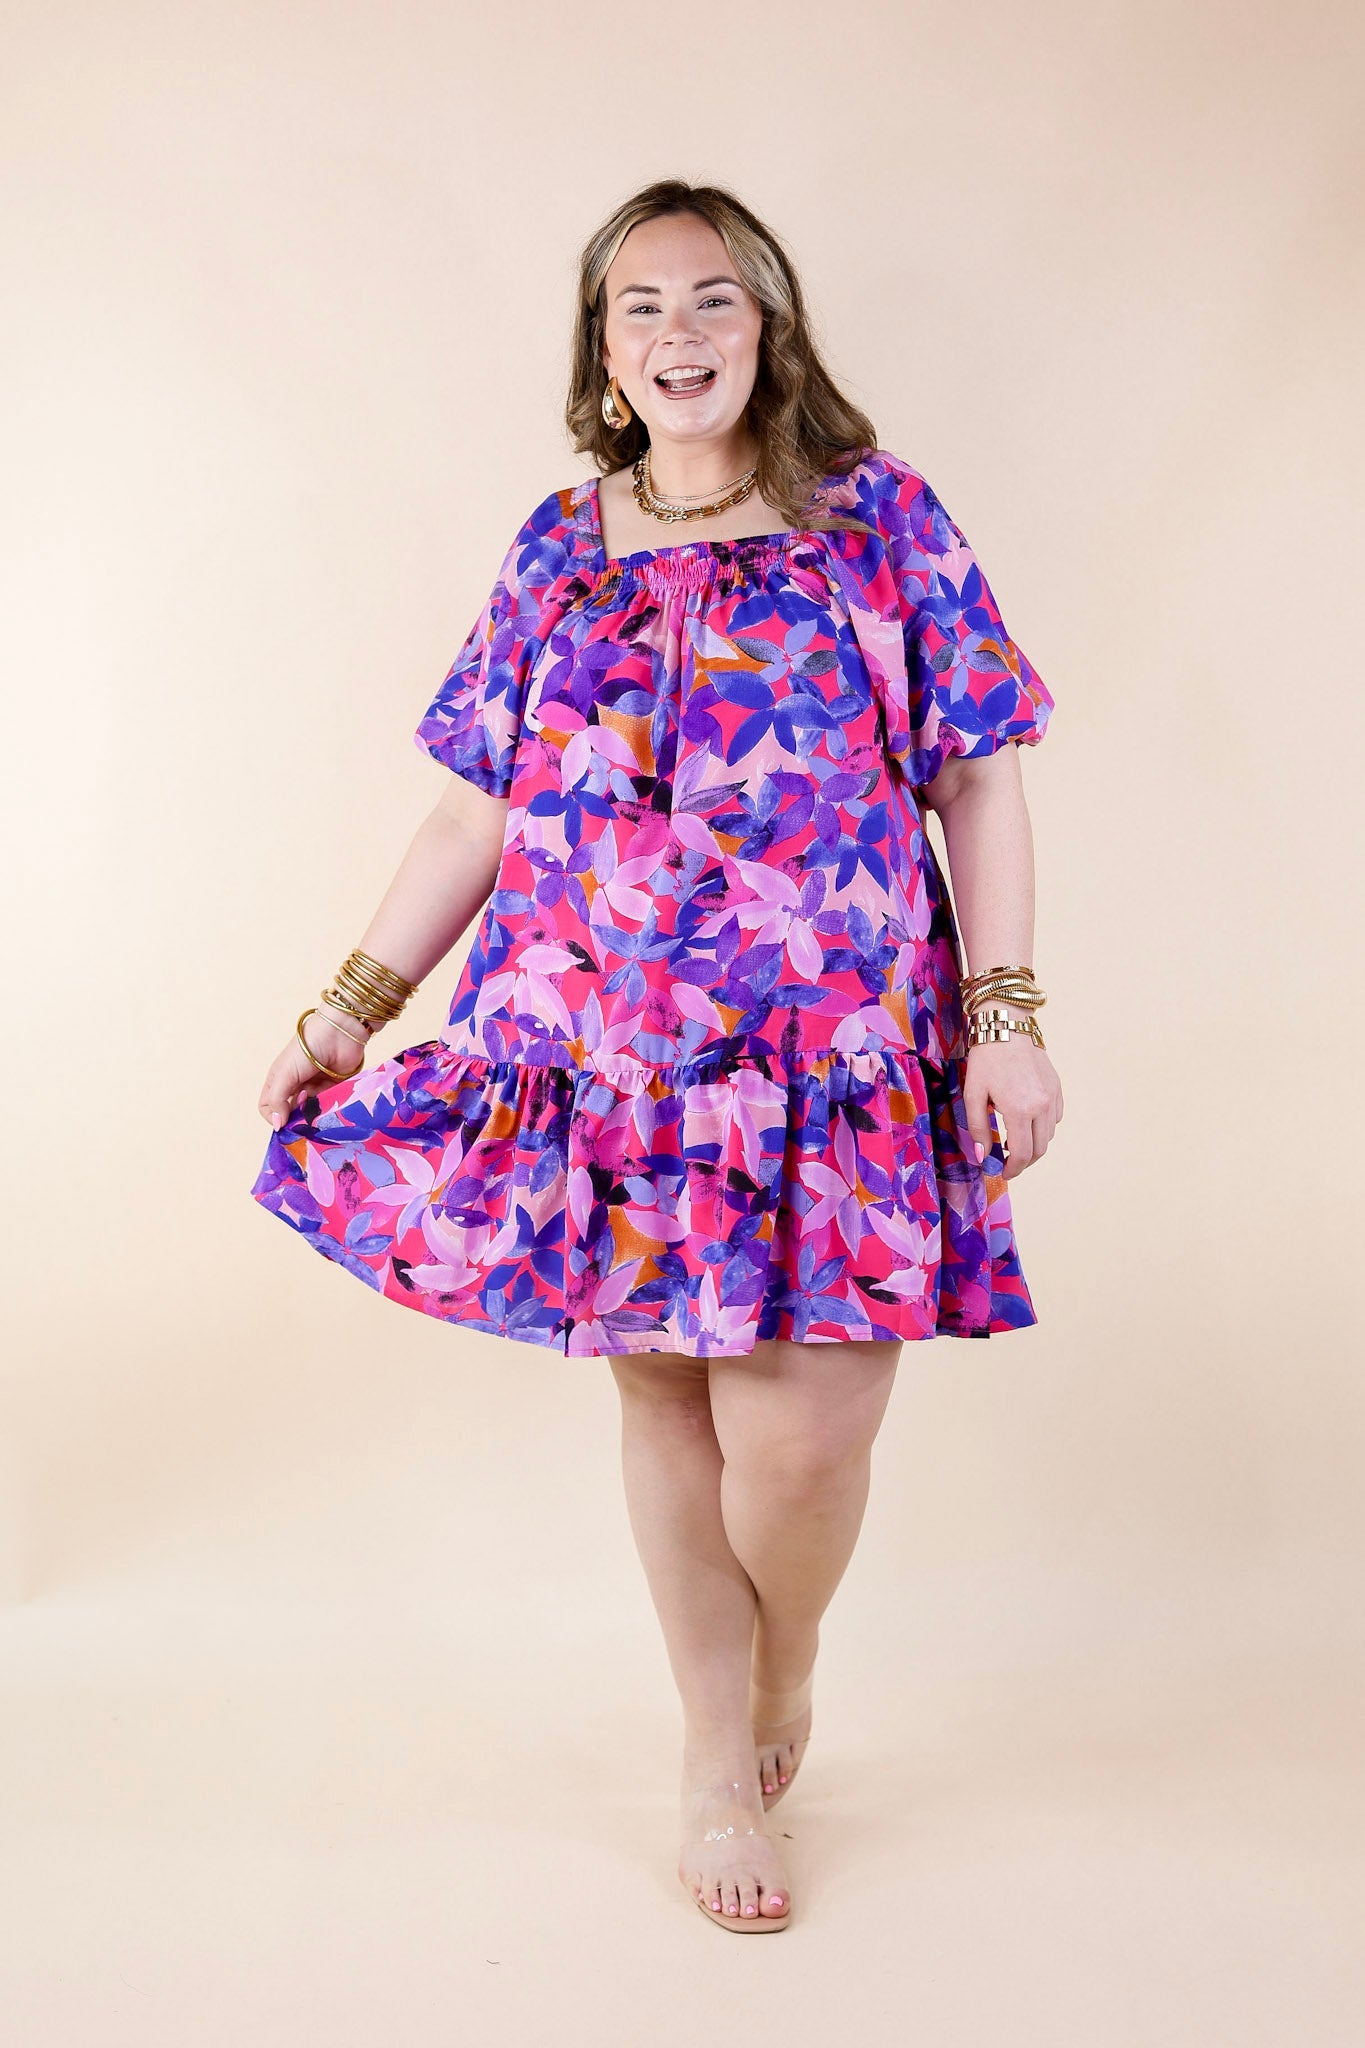 Blossoming Beauty Floral Print Dress in Magenta Pink - Giddy Up Glamour Boutique